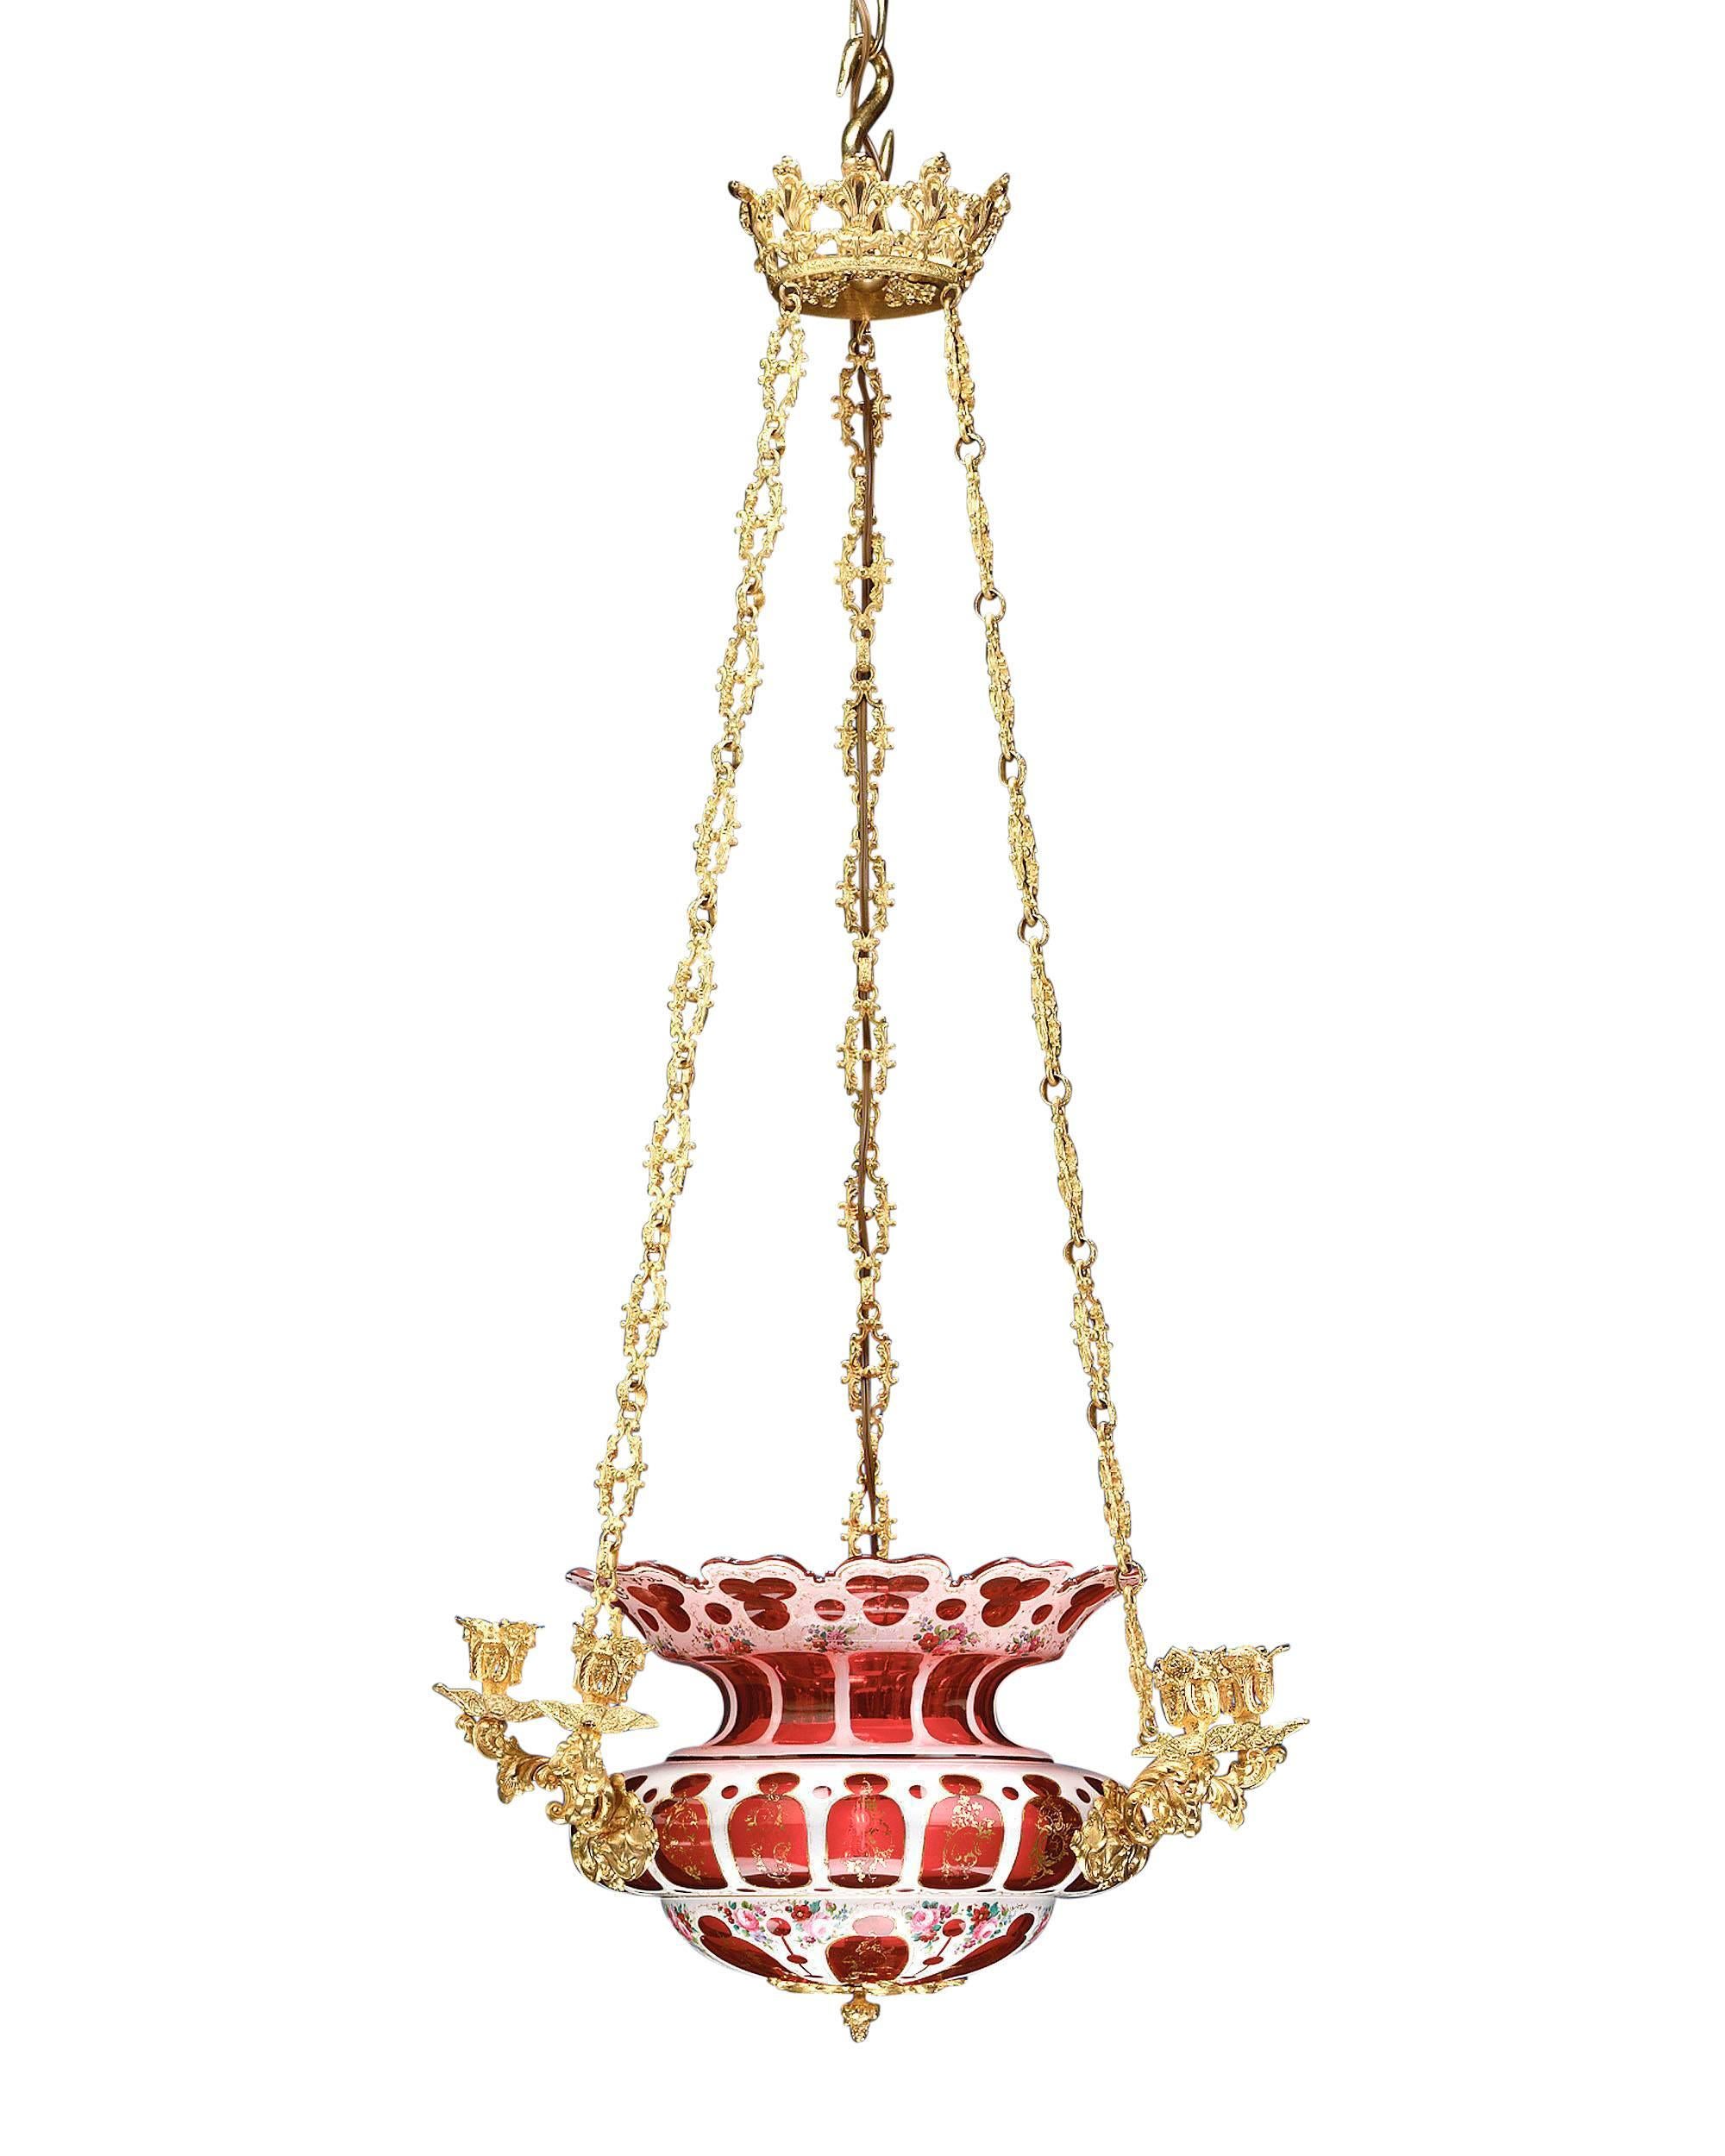 A beautiful chandelier of exquisite Bohemian overlaid ruby and white glass hand-painted with colorful floral sprays and gilt accents. The luminous center bowl hangs from a majestic doré bronze crown and is surrounded by six doré bronze candle